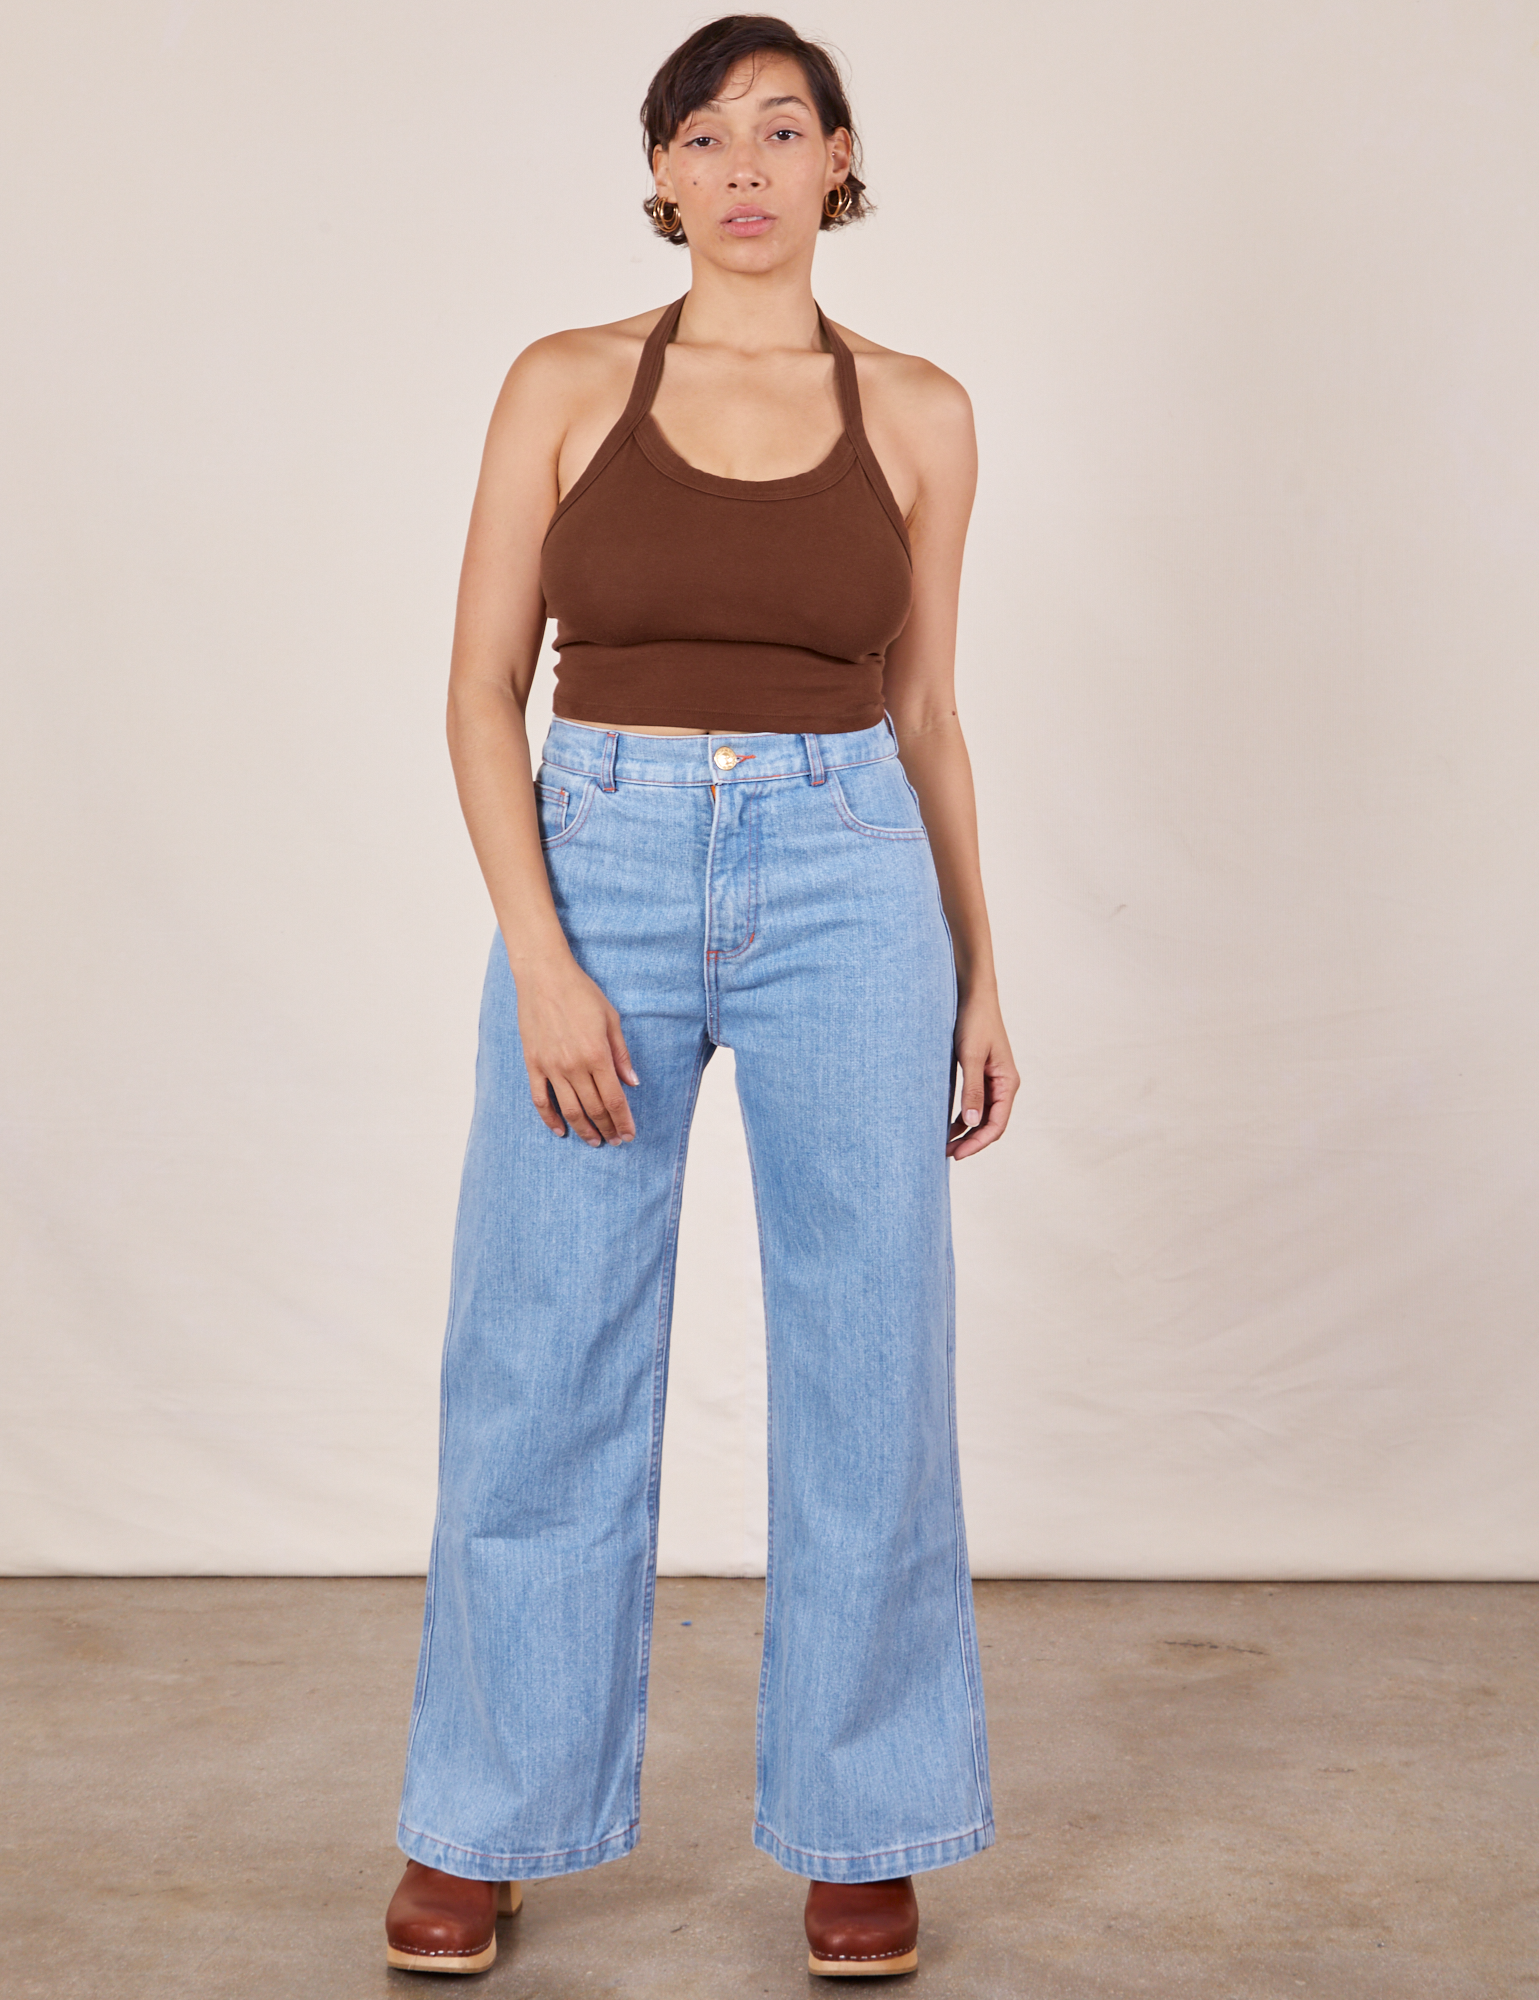 Tiara is 5&#39;4&quot; and wearing XS Halter Top in Fudgesicle Brown and light wash Sailor Jeans